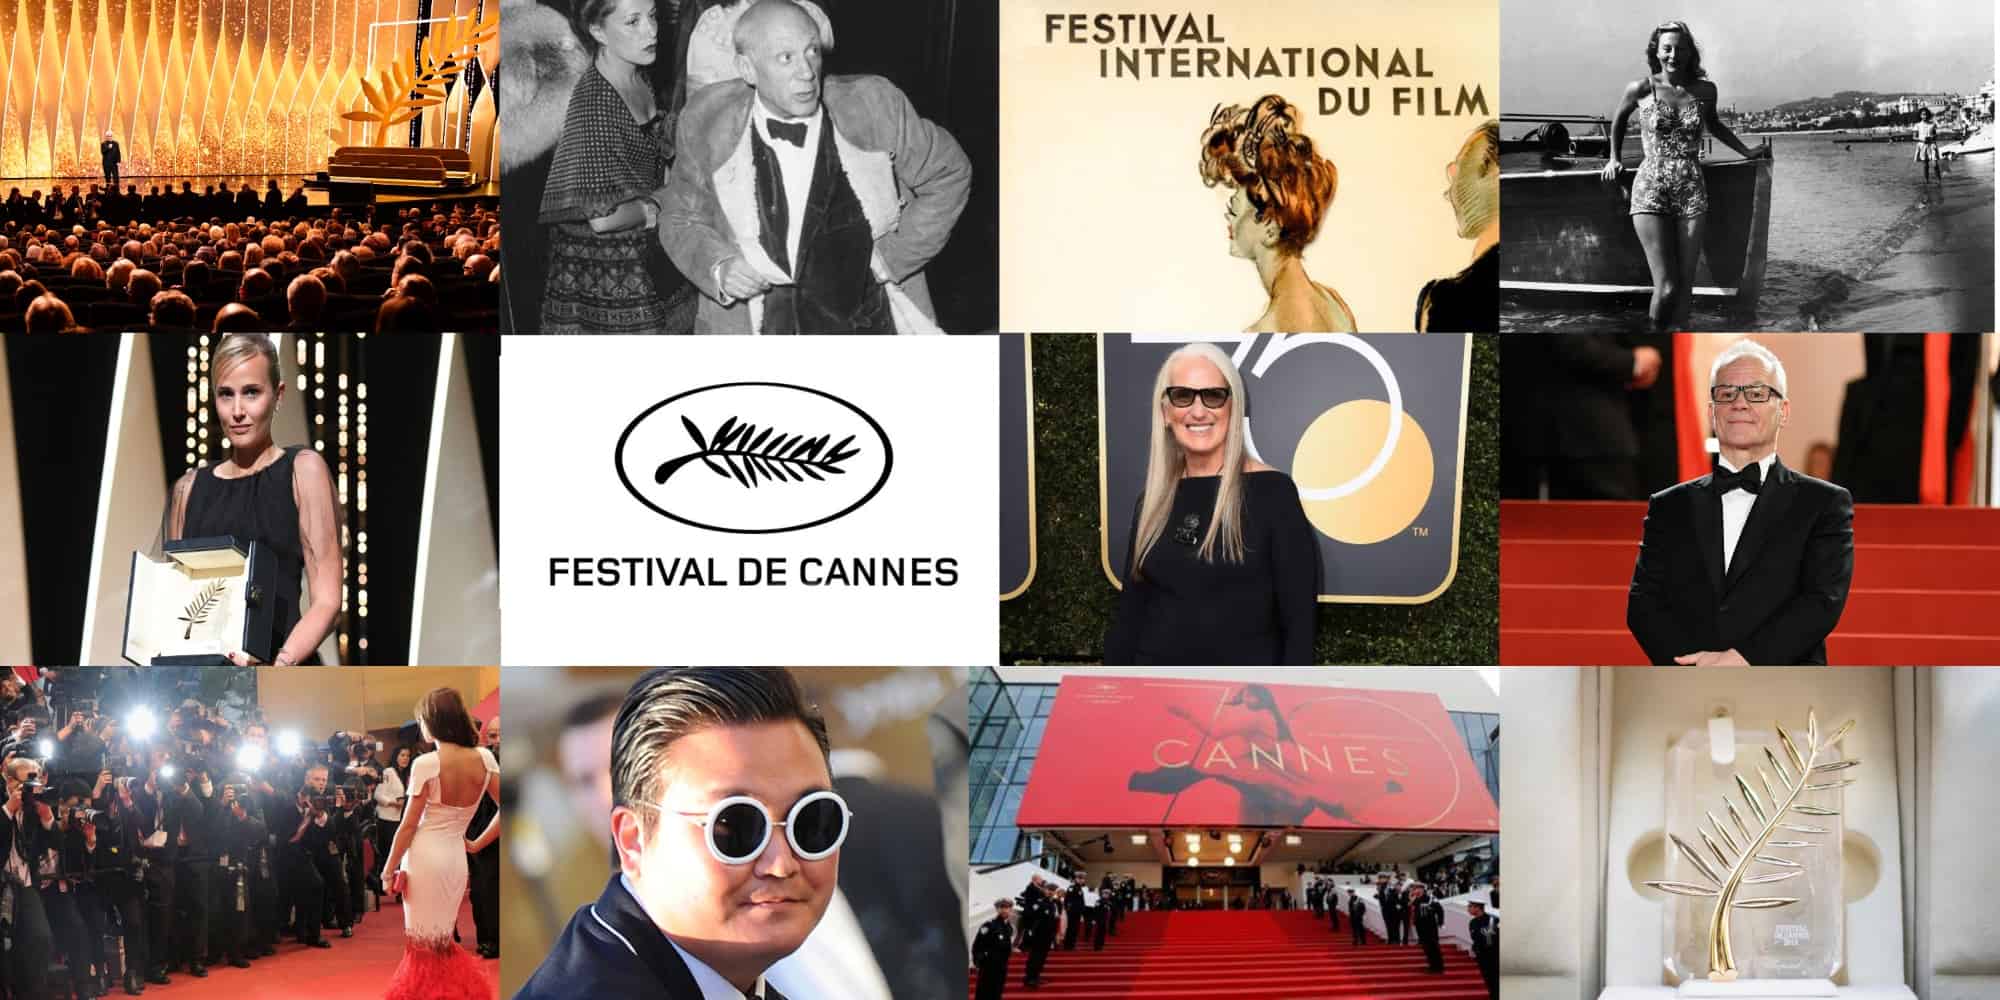 Cannes film Festival Featured Image